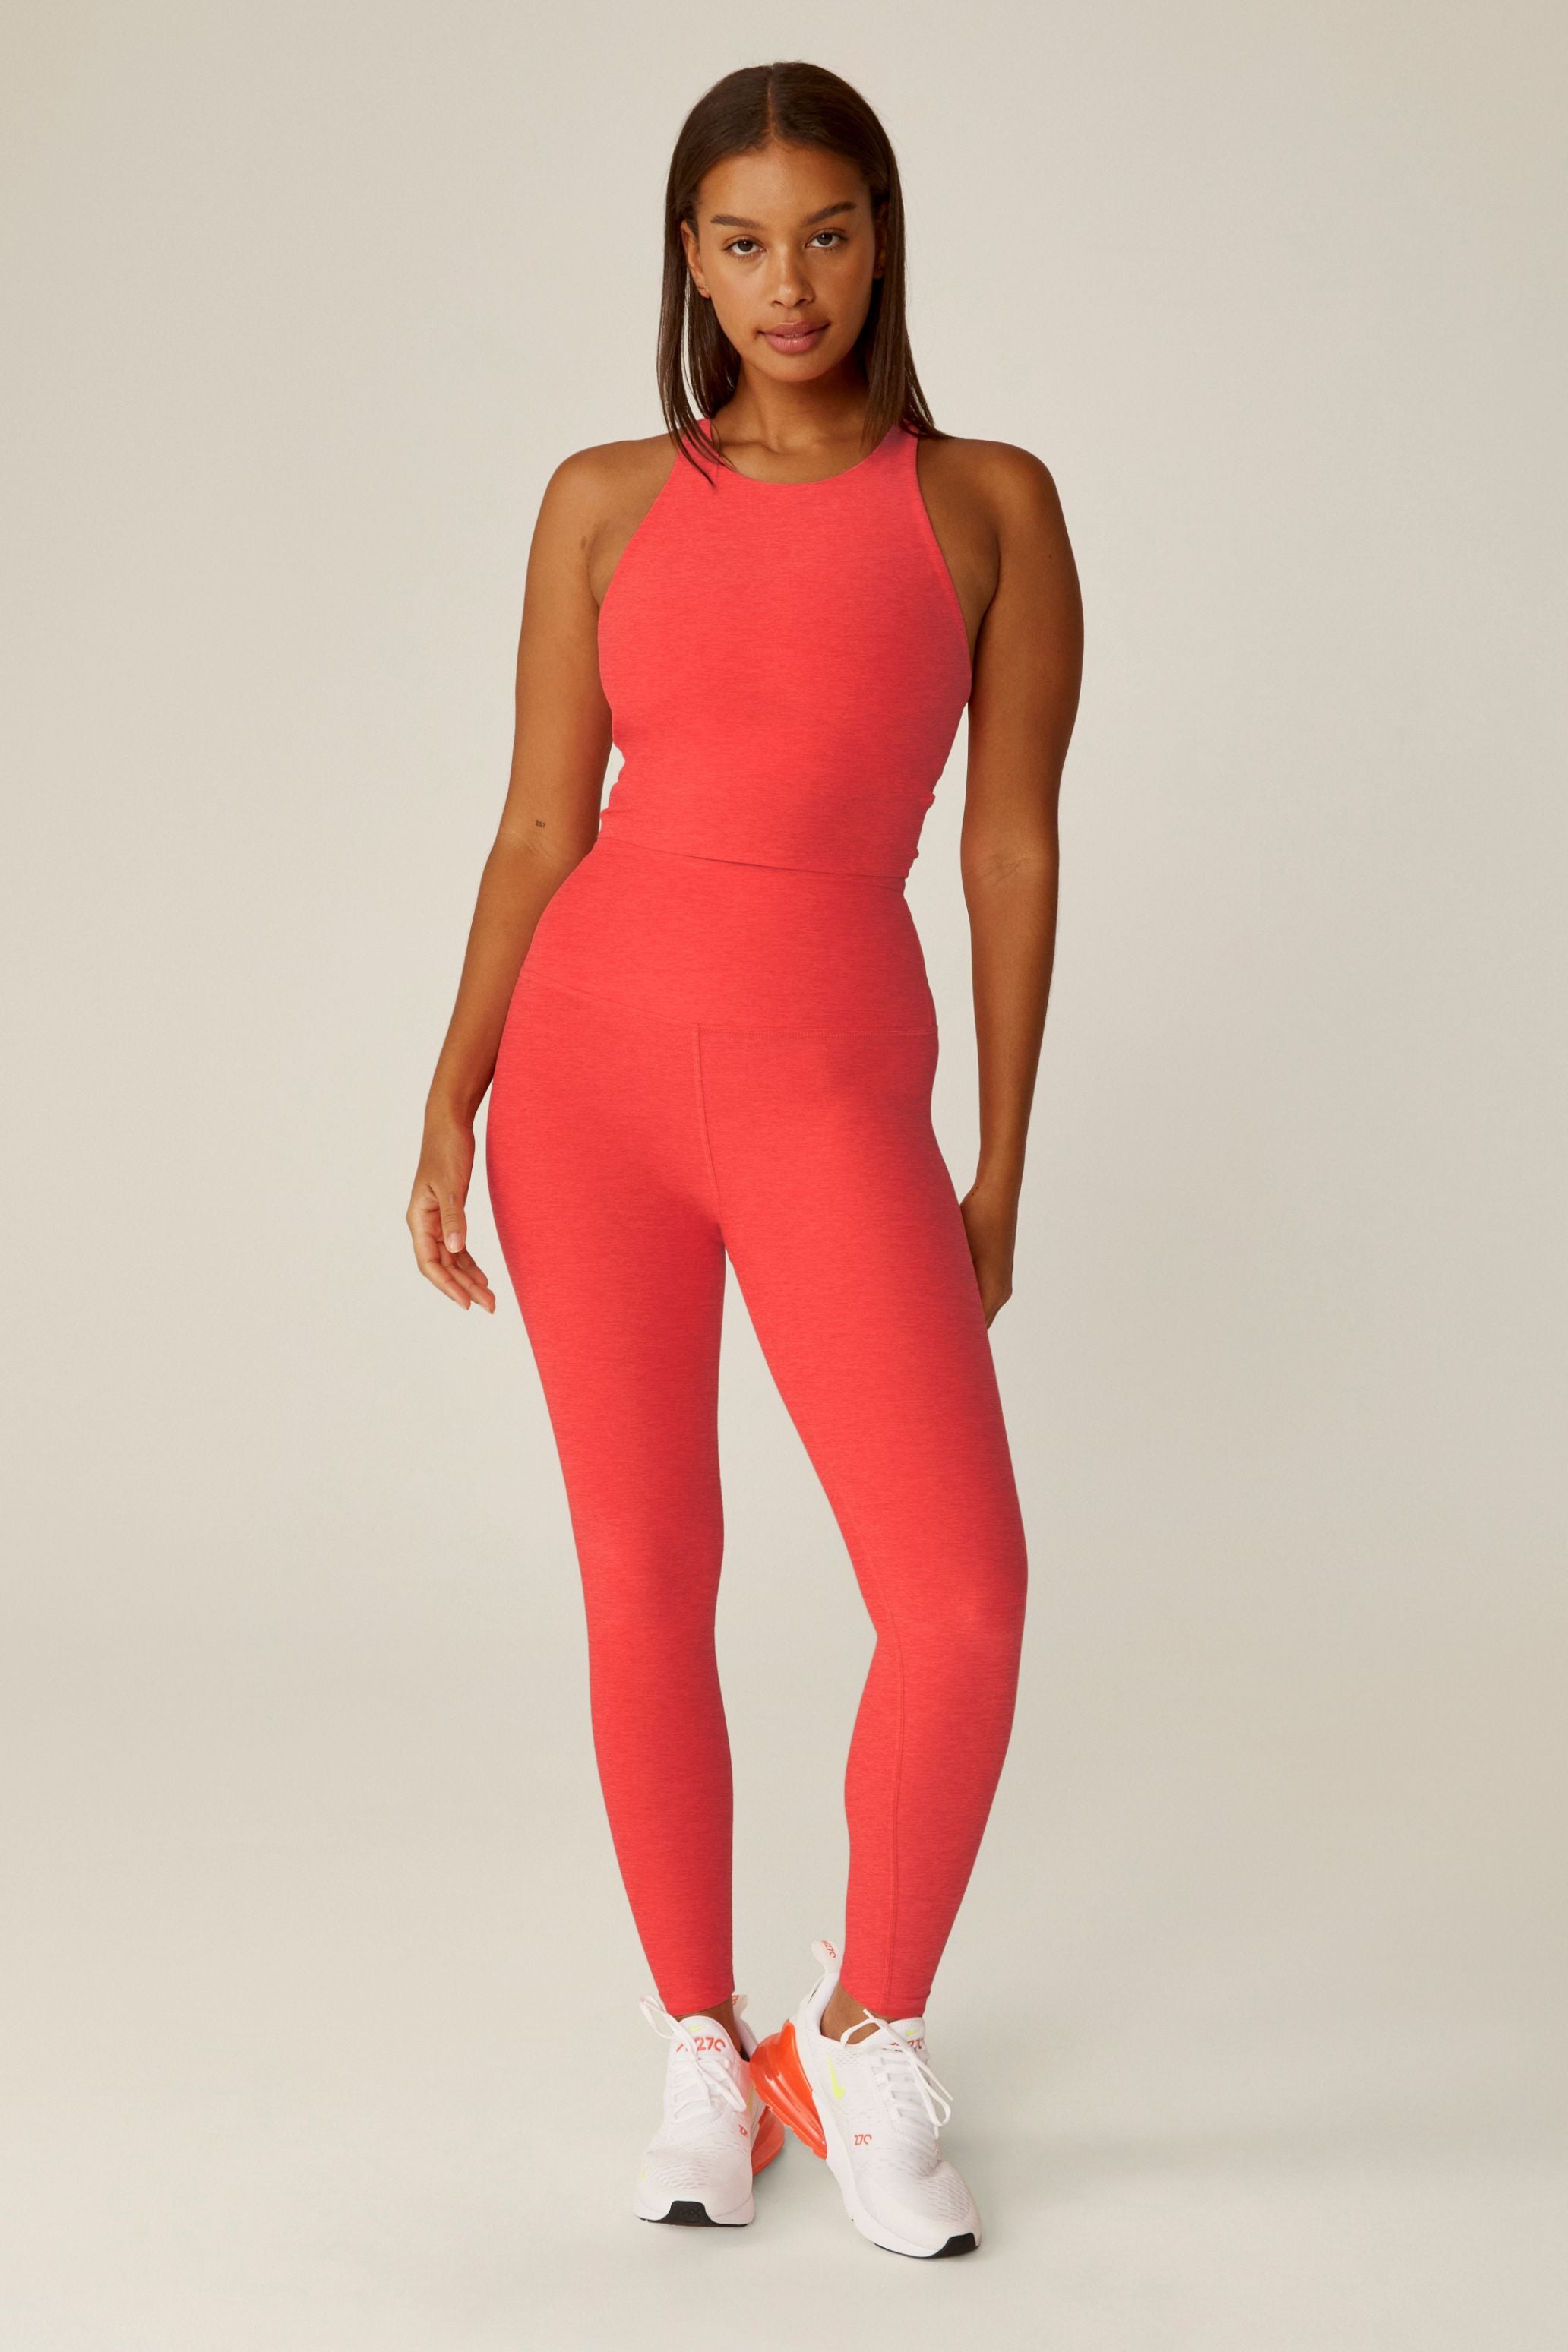 Shop Red ash heather Spacedye Caught In the Midi High Waisted Legging by  BEYOND YOGA online – Tribe71